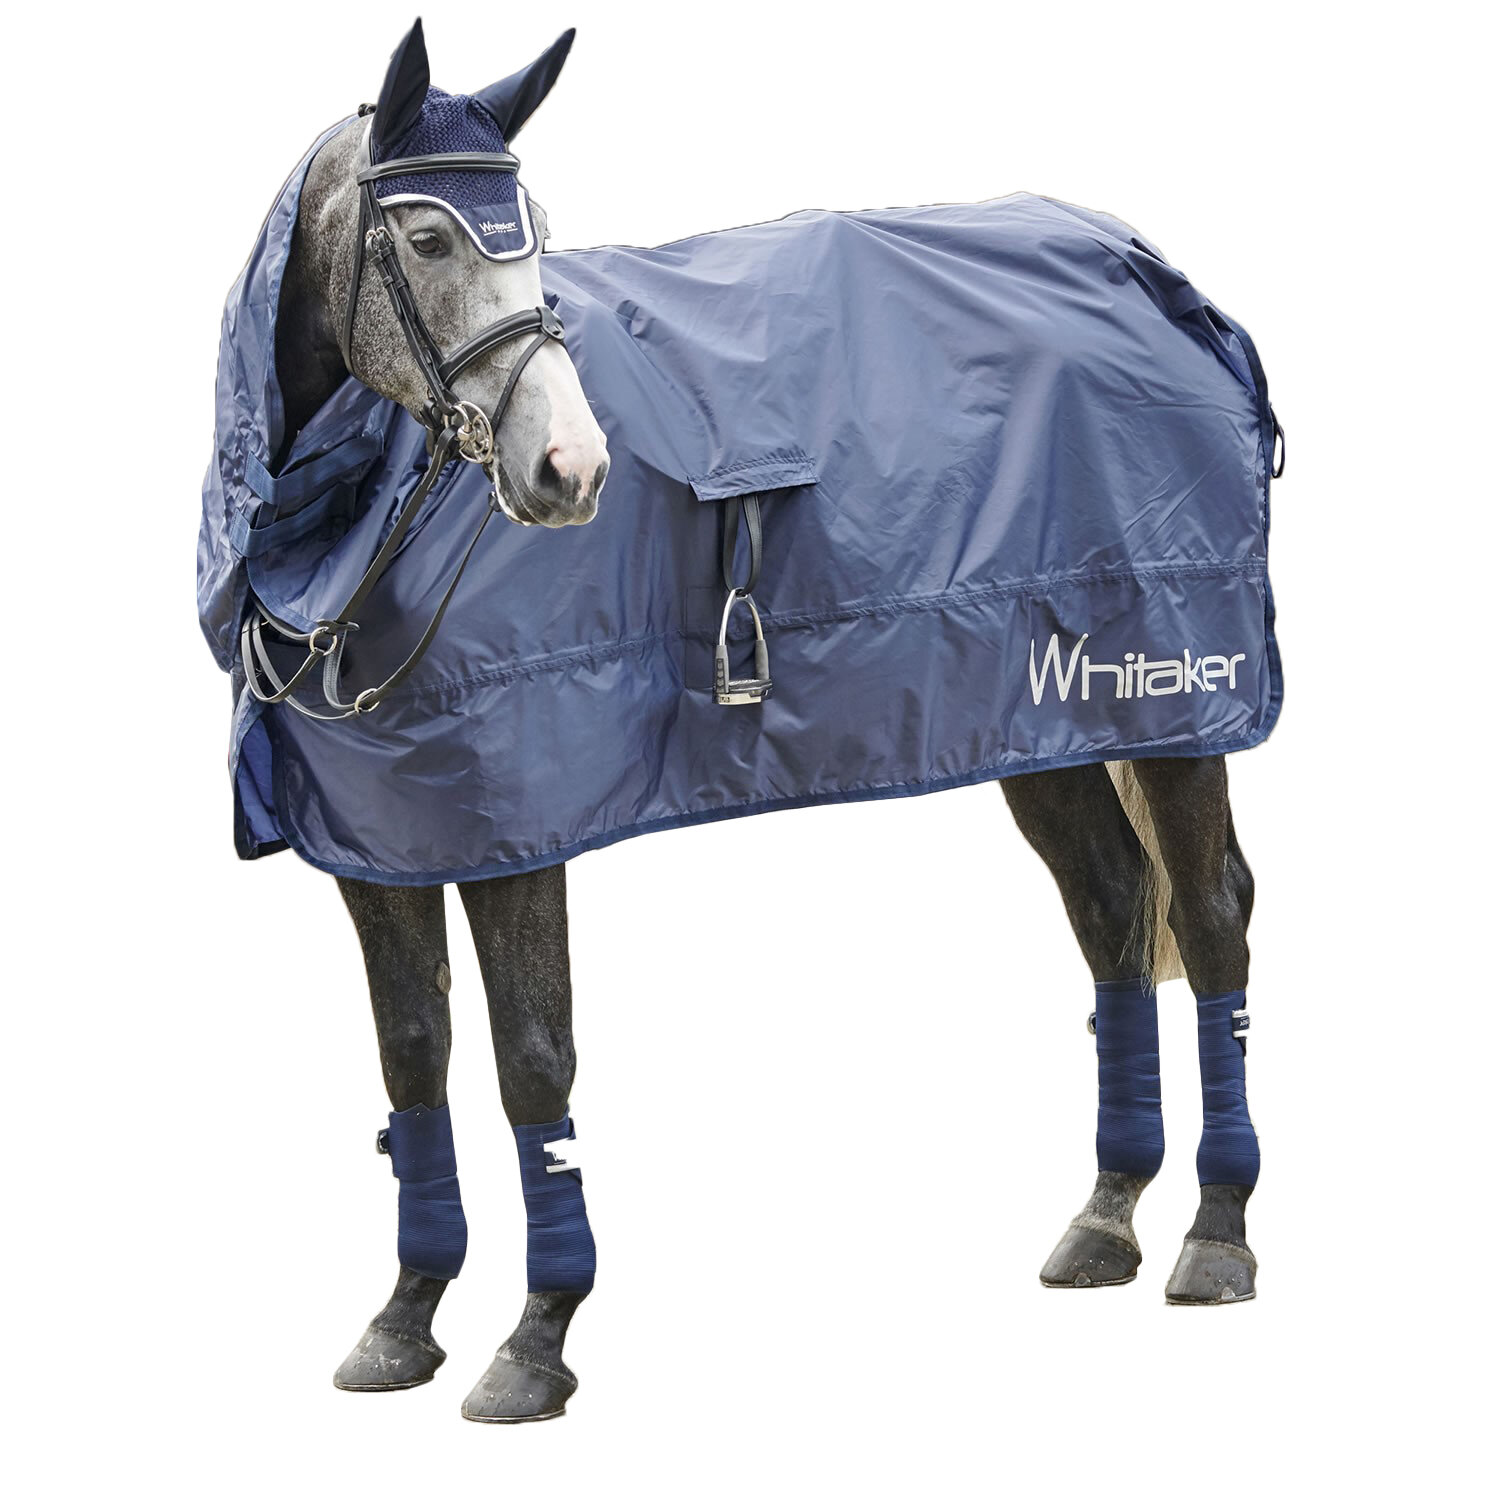 Whitaker Rothwell Roll Up Horse Turnout Rug